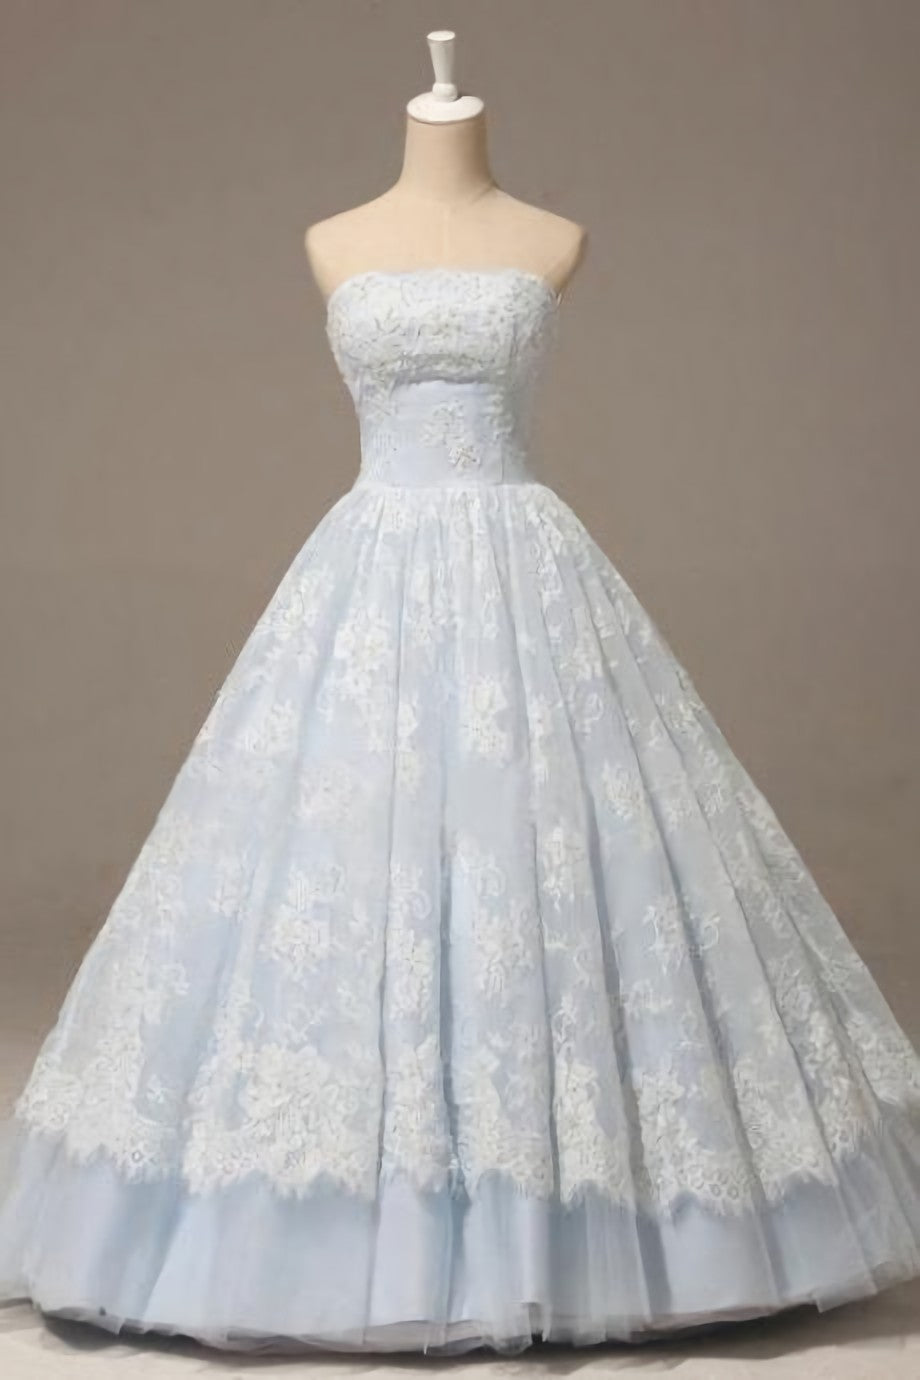 Party Dress For Wedding, Light Blue Organza Lace Sweetheart A Line Long Prom Dress, Princess Ball Gown Dress